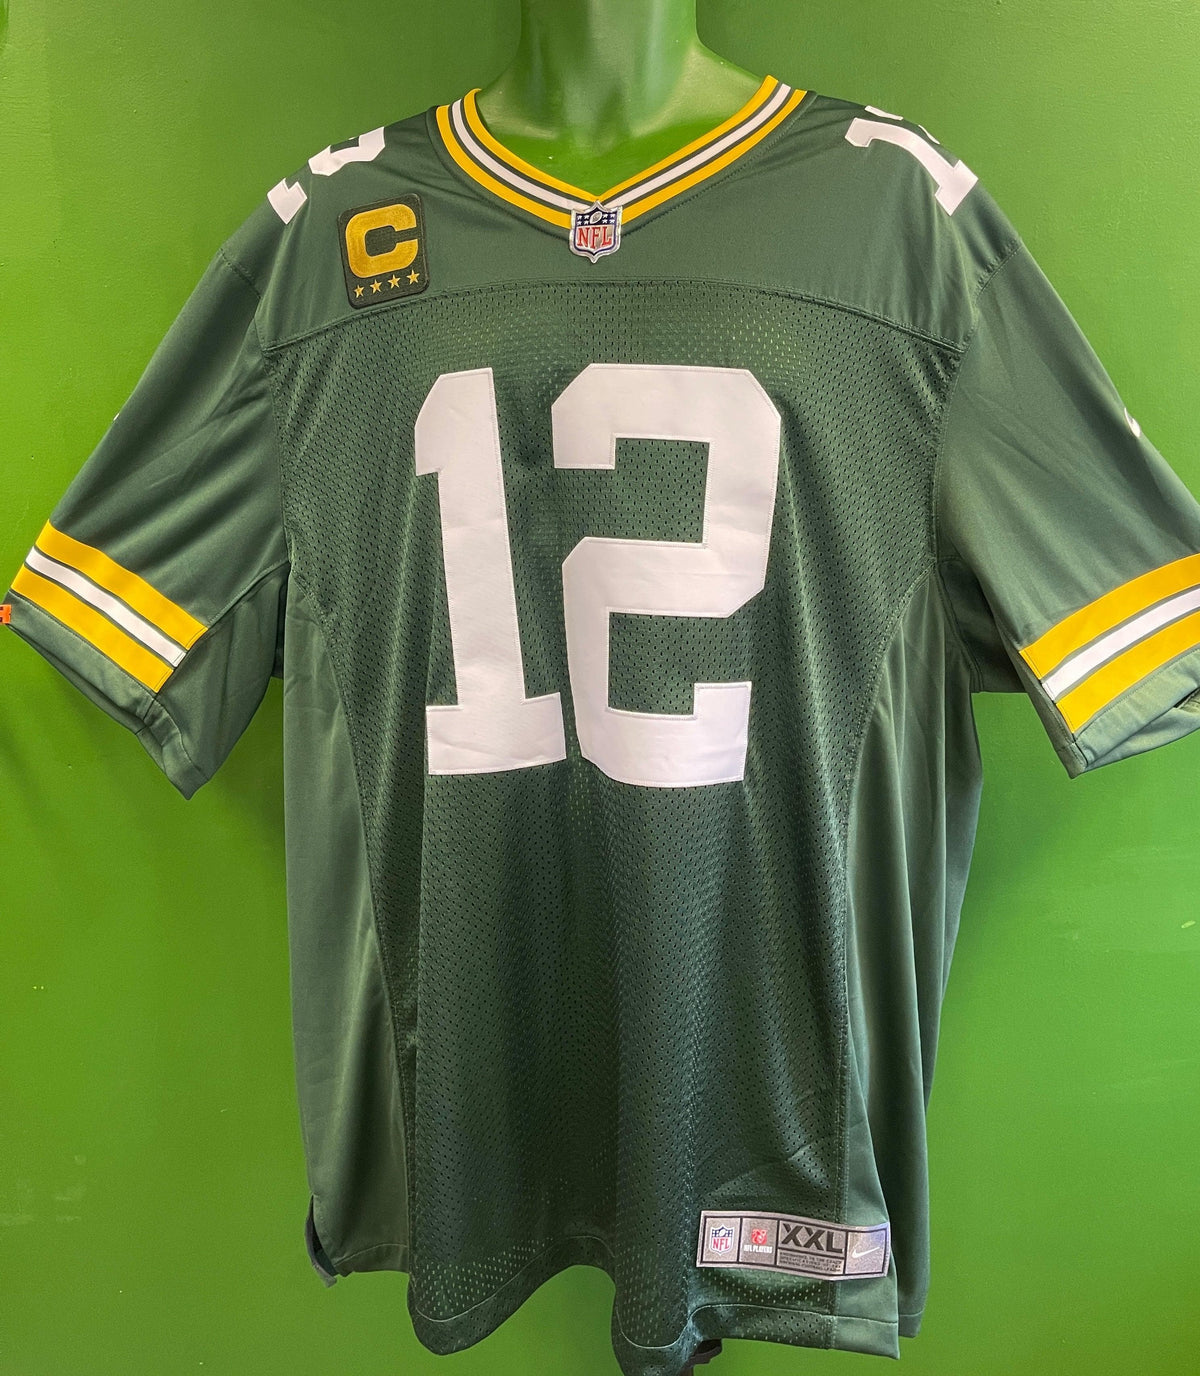 NFL Green Bay Packers Aaron Rodgers #12 Stitched Jersey Men's 2X-Large Captain NWT